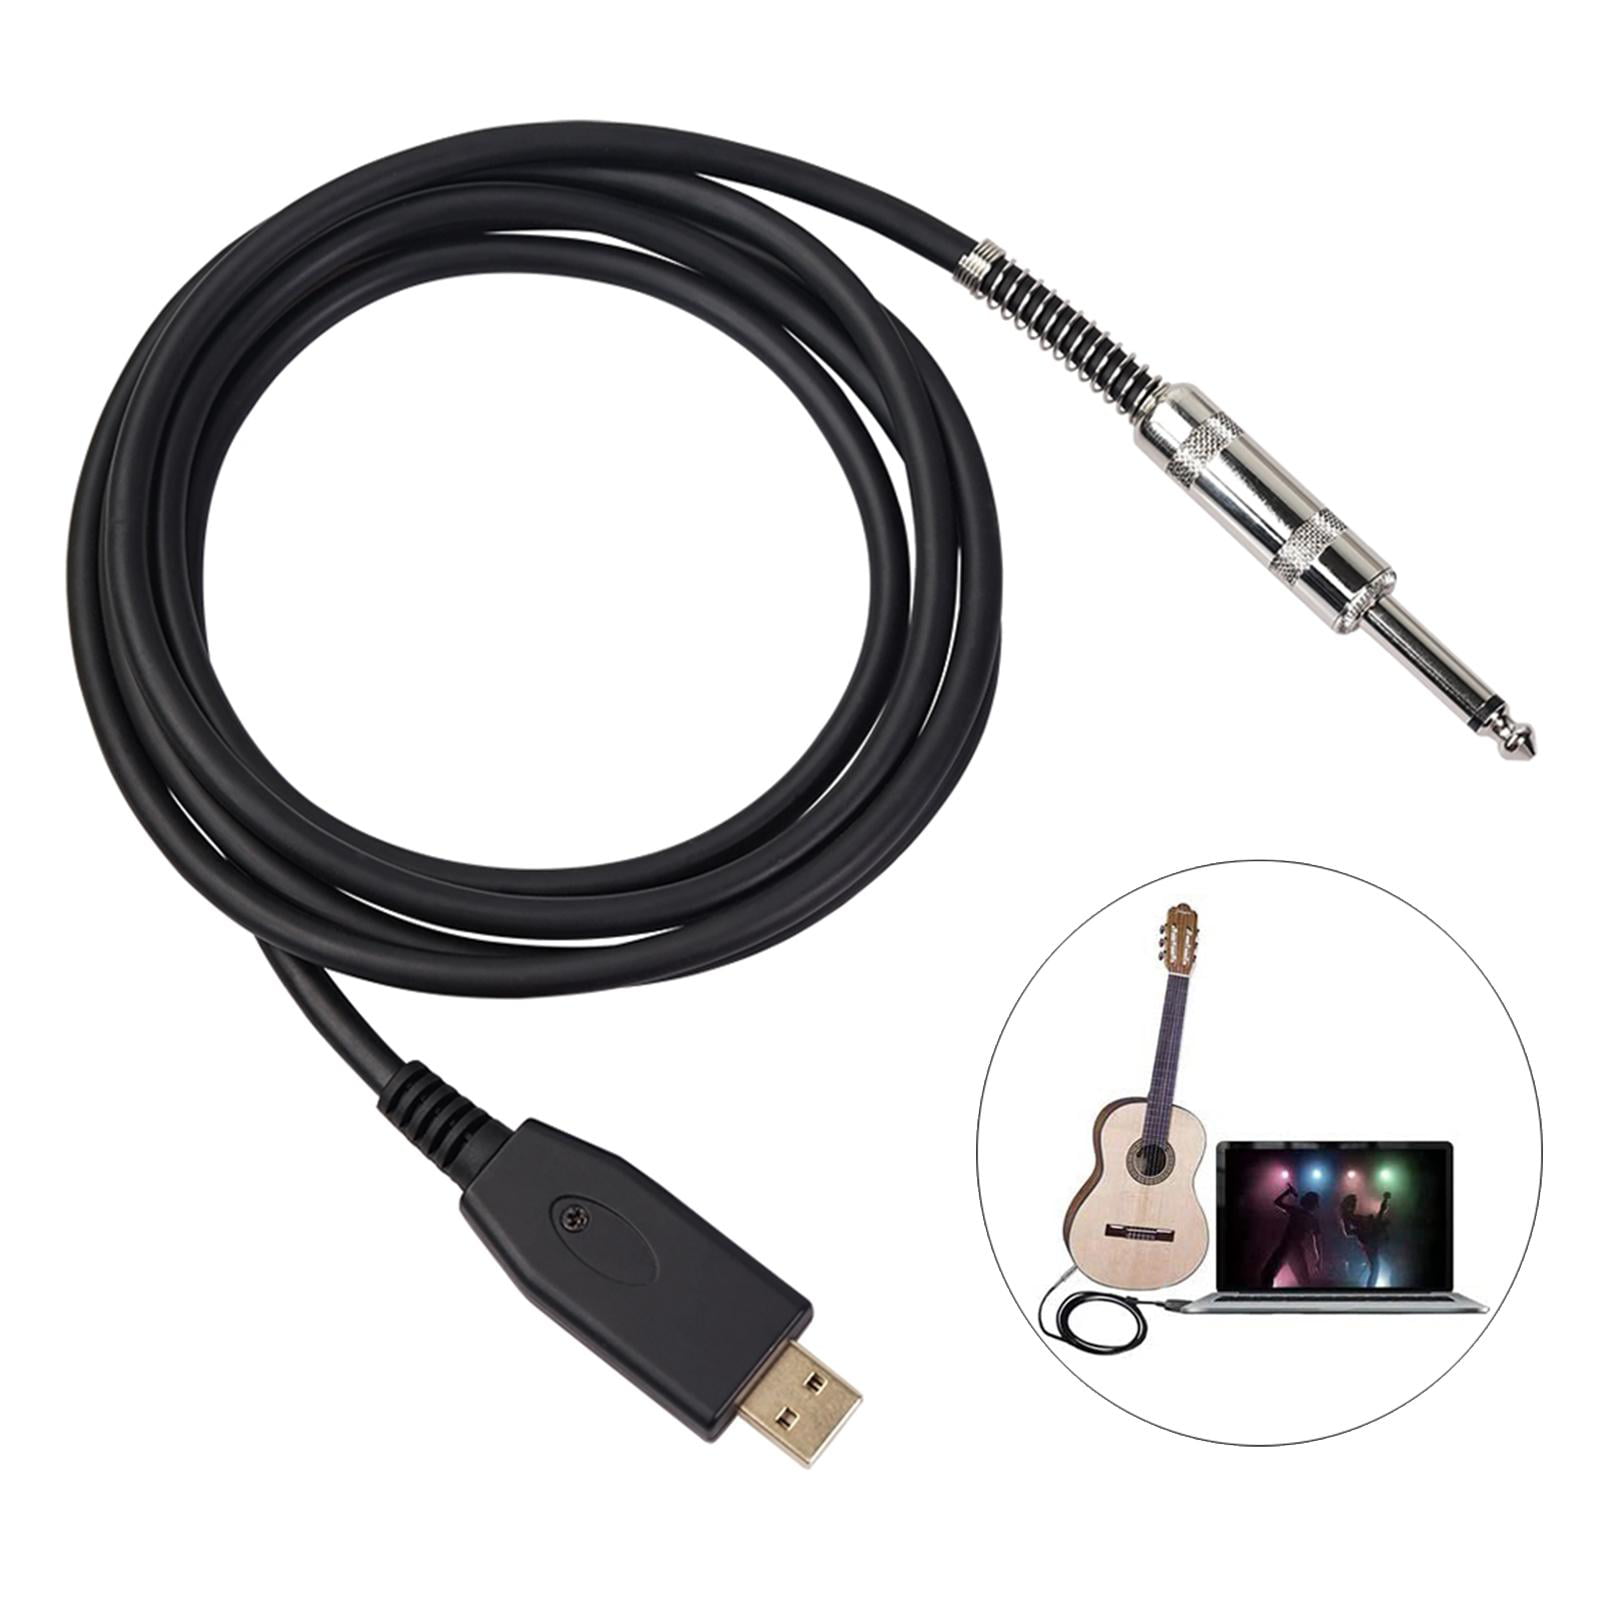 USB Guitar Cable,Guitar Bass to USB Link Connection Cable Adapter,Replacement Professional Guitar to PC USB Link Recording Cable Lead Adaptor 2.8M/9.2FT 